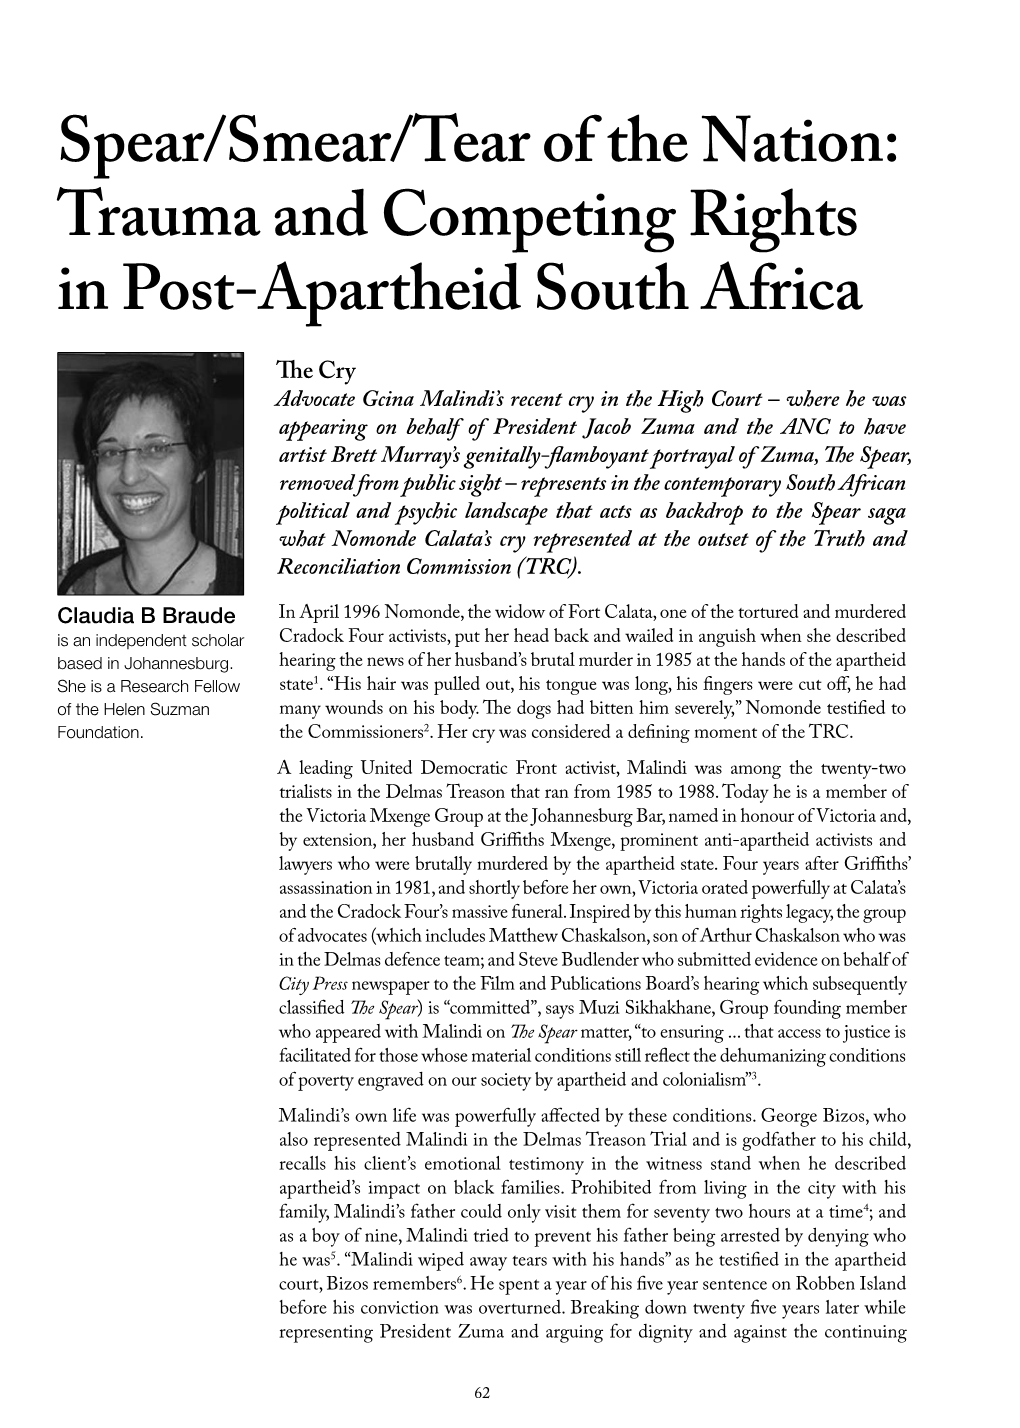 Trauma and Competing Rights in Post-Apartheid South Africa